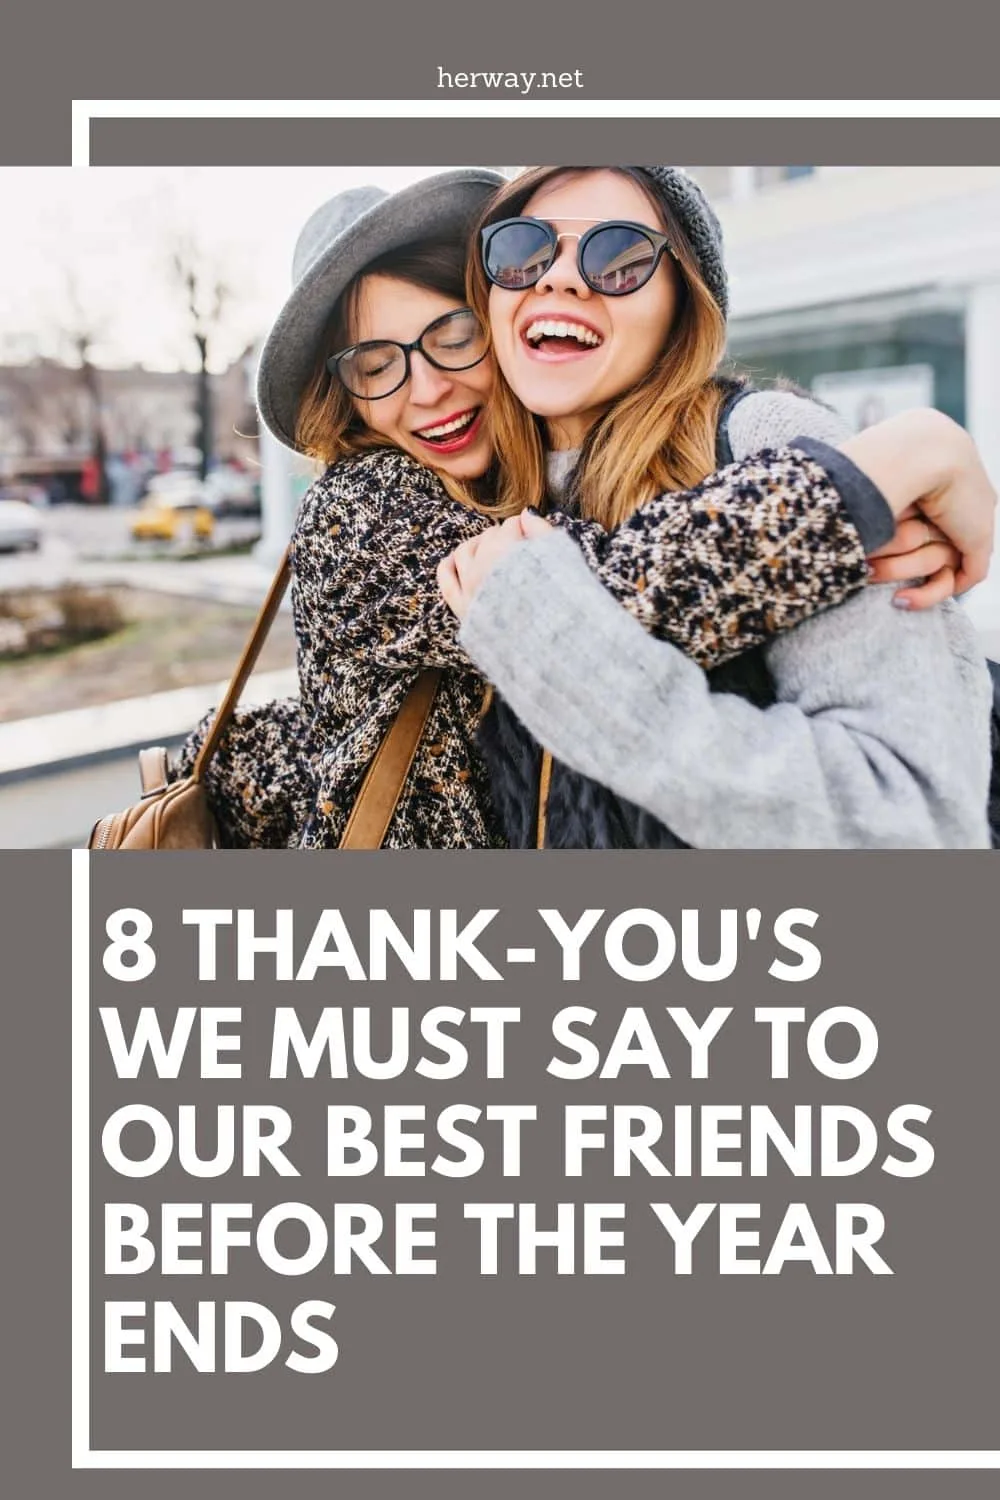 8 Thank-you's We Must Say To Our Best Friends Before The Year Ends